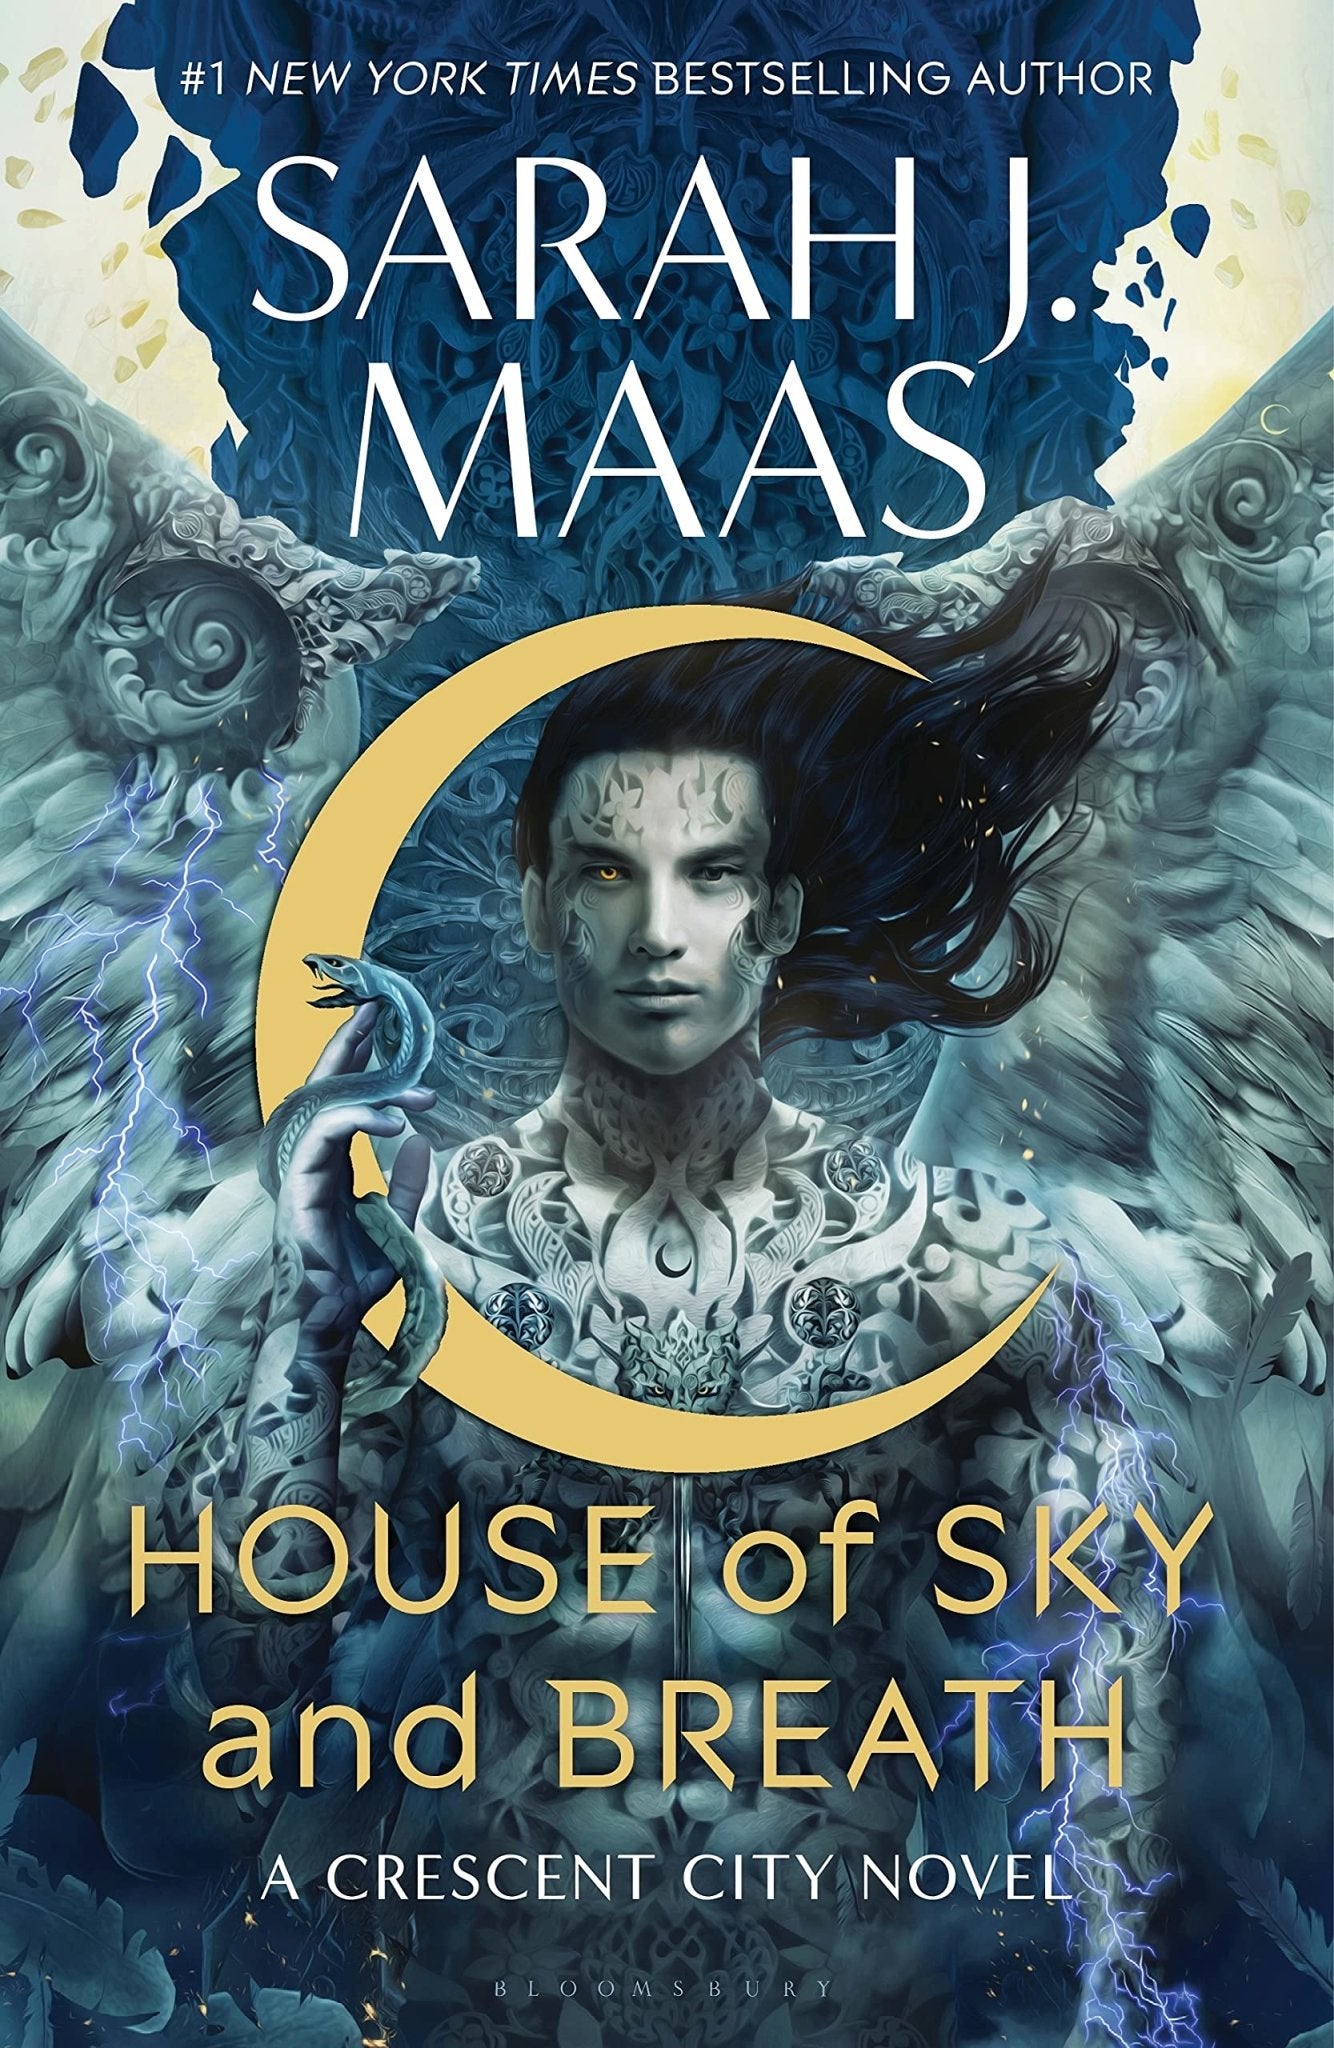 House of Sky and Breath (Crescent City #2) by Sarah J. Maas [Hardcover] - LV'S Global Media